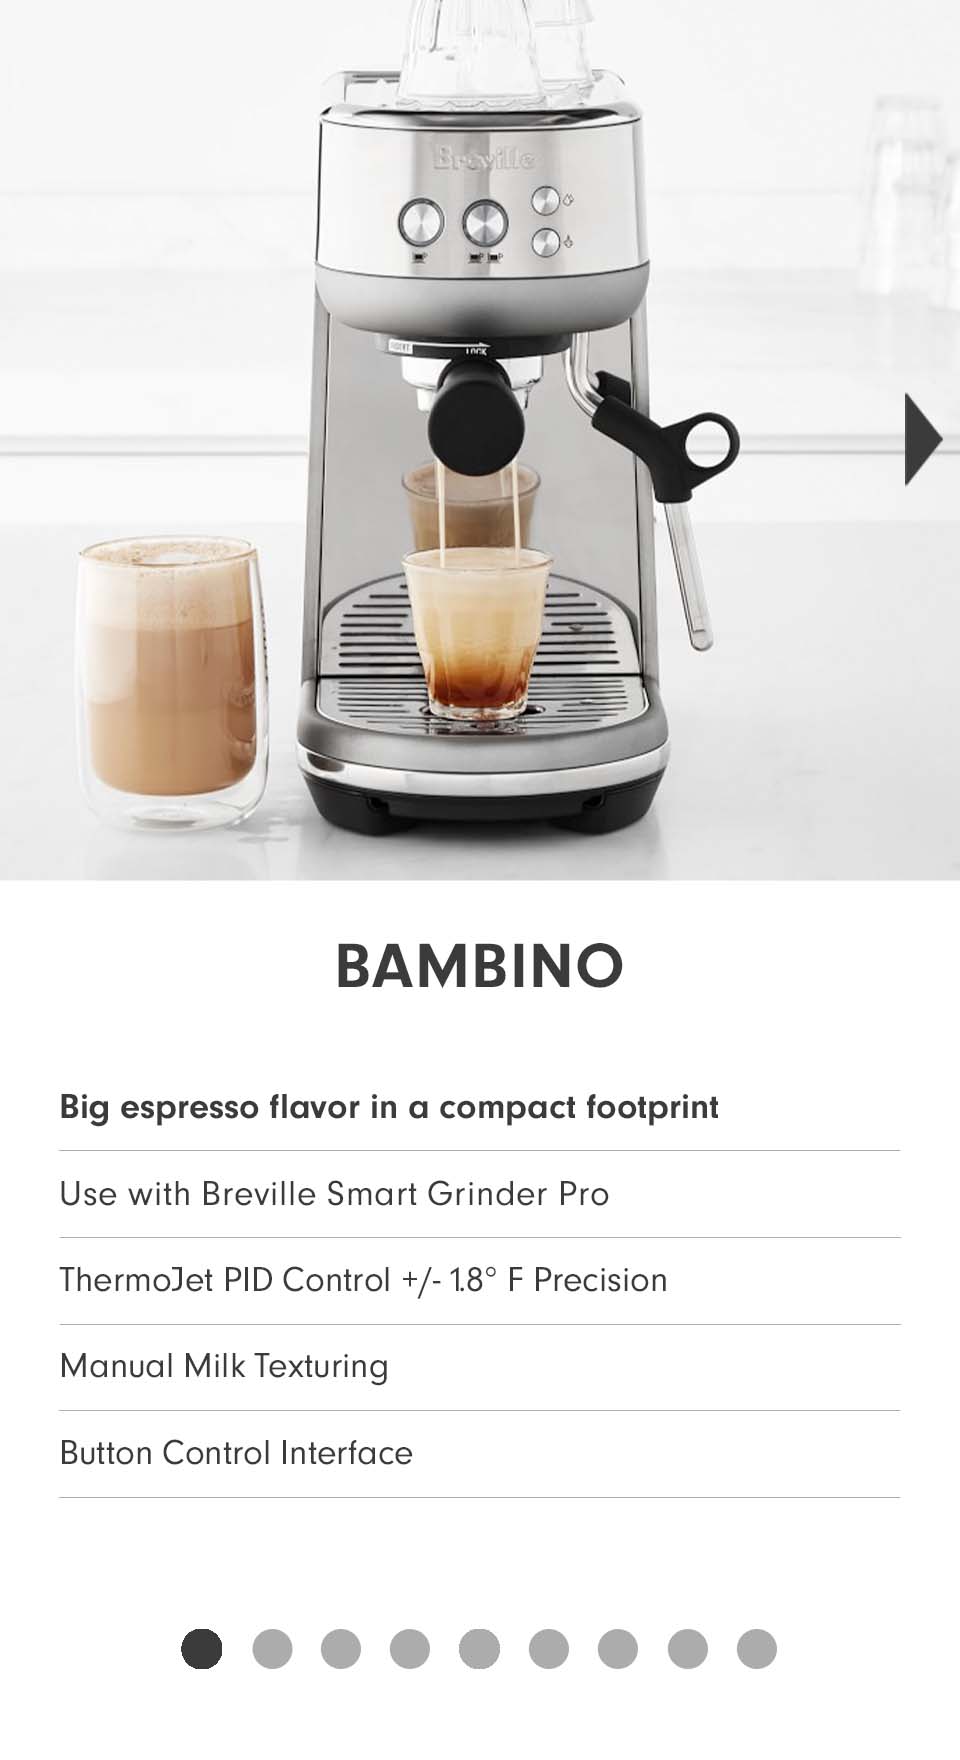 Best mini scale to fit a Breville Bambino (tiny) tray? My current